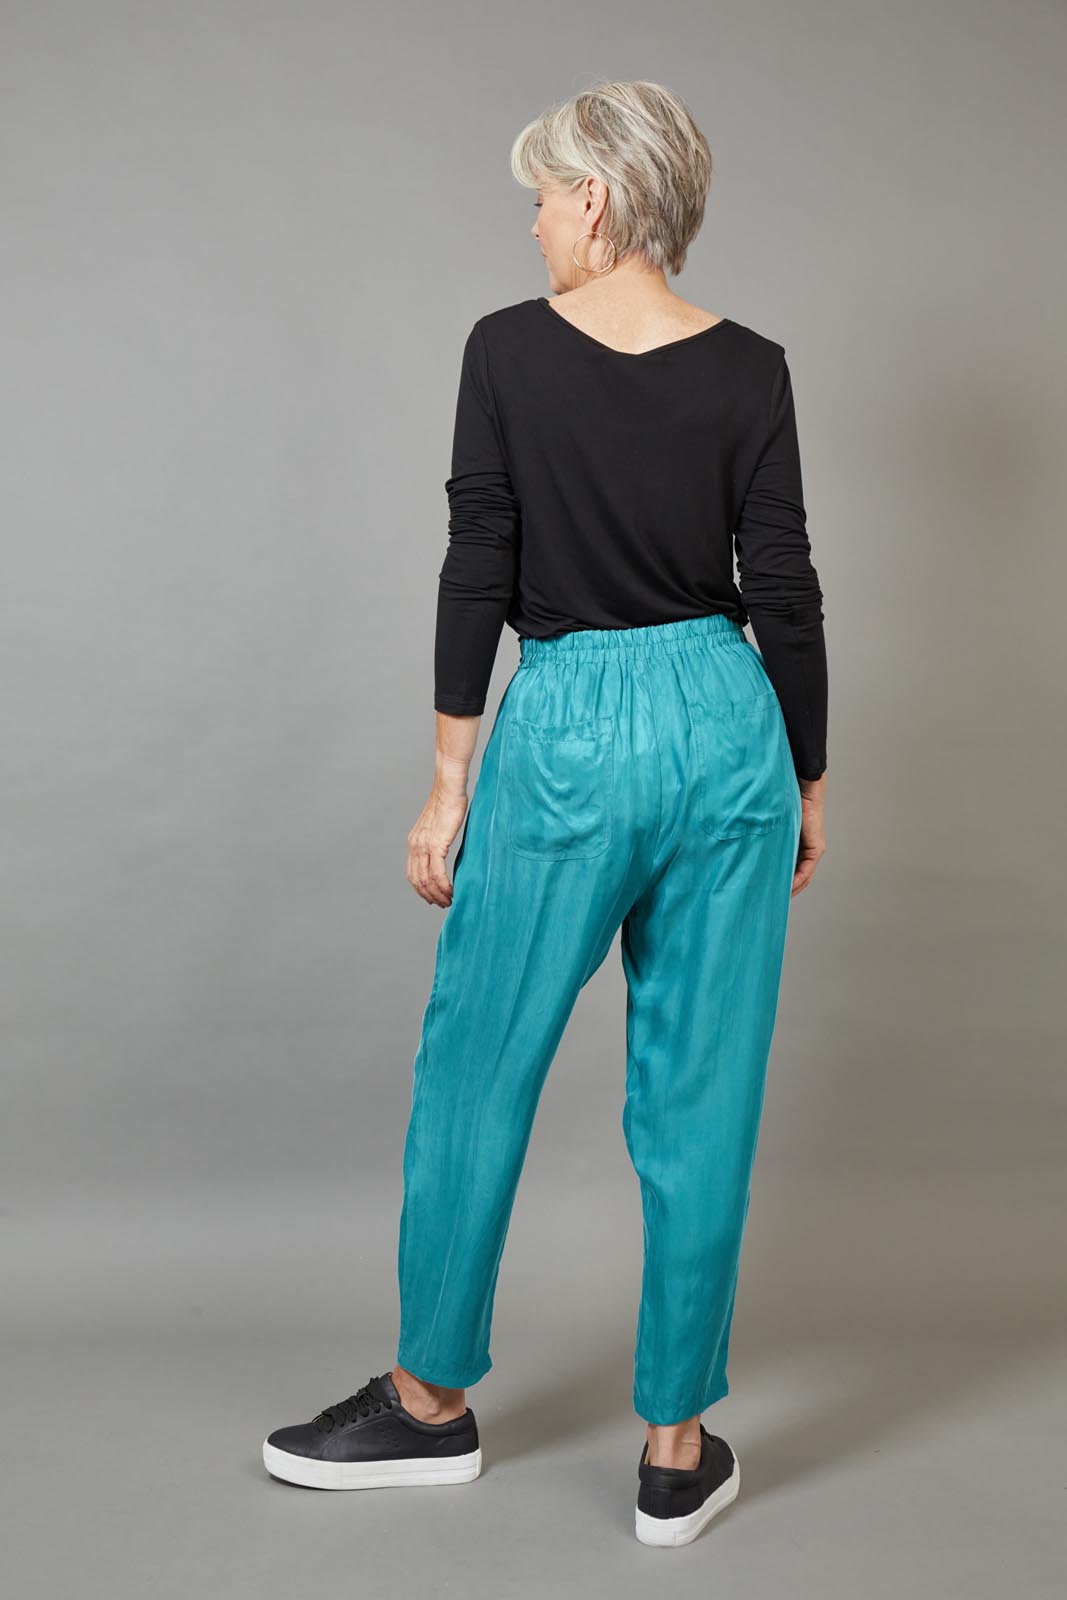 EB & IVE VIENETTA RELAXED PANT - TEAL